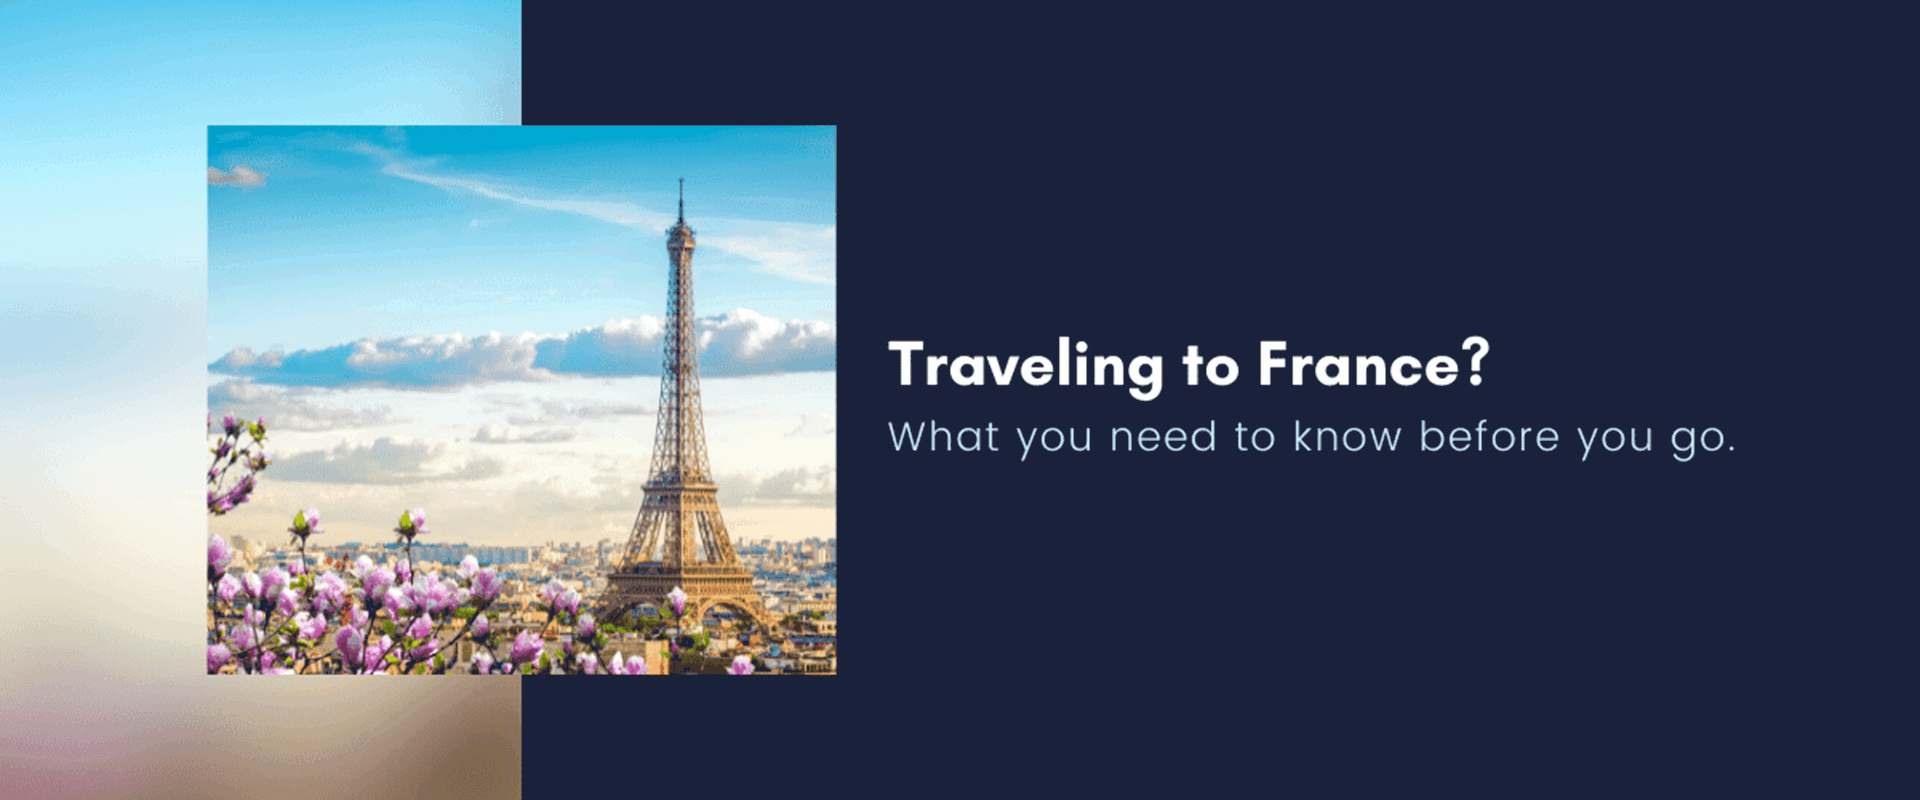 travel to france requirements from uk